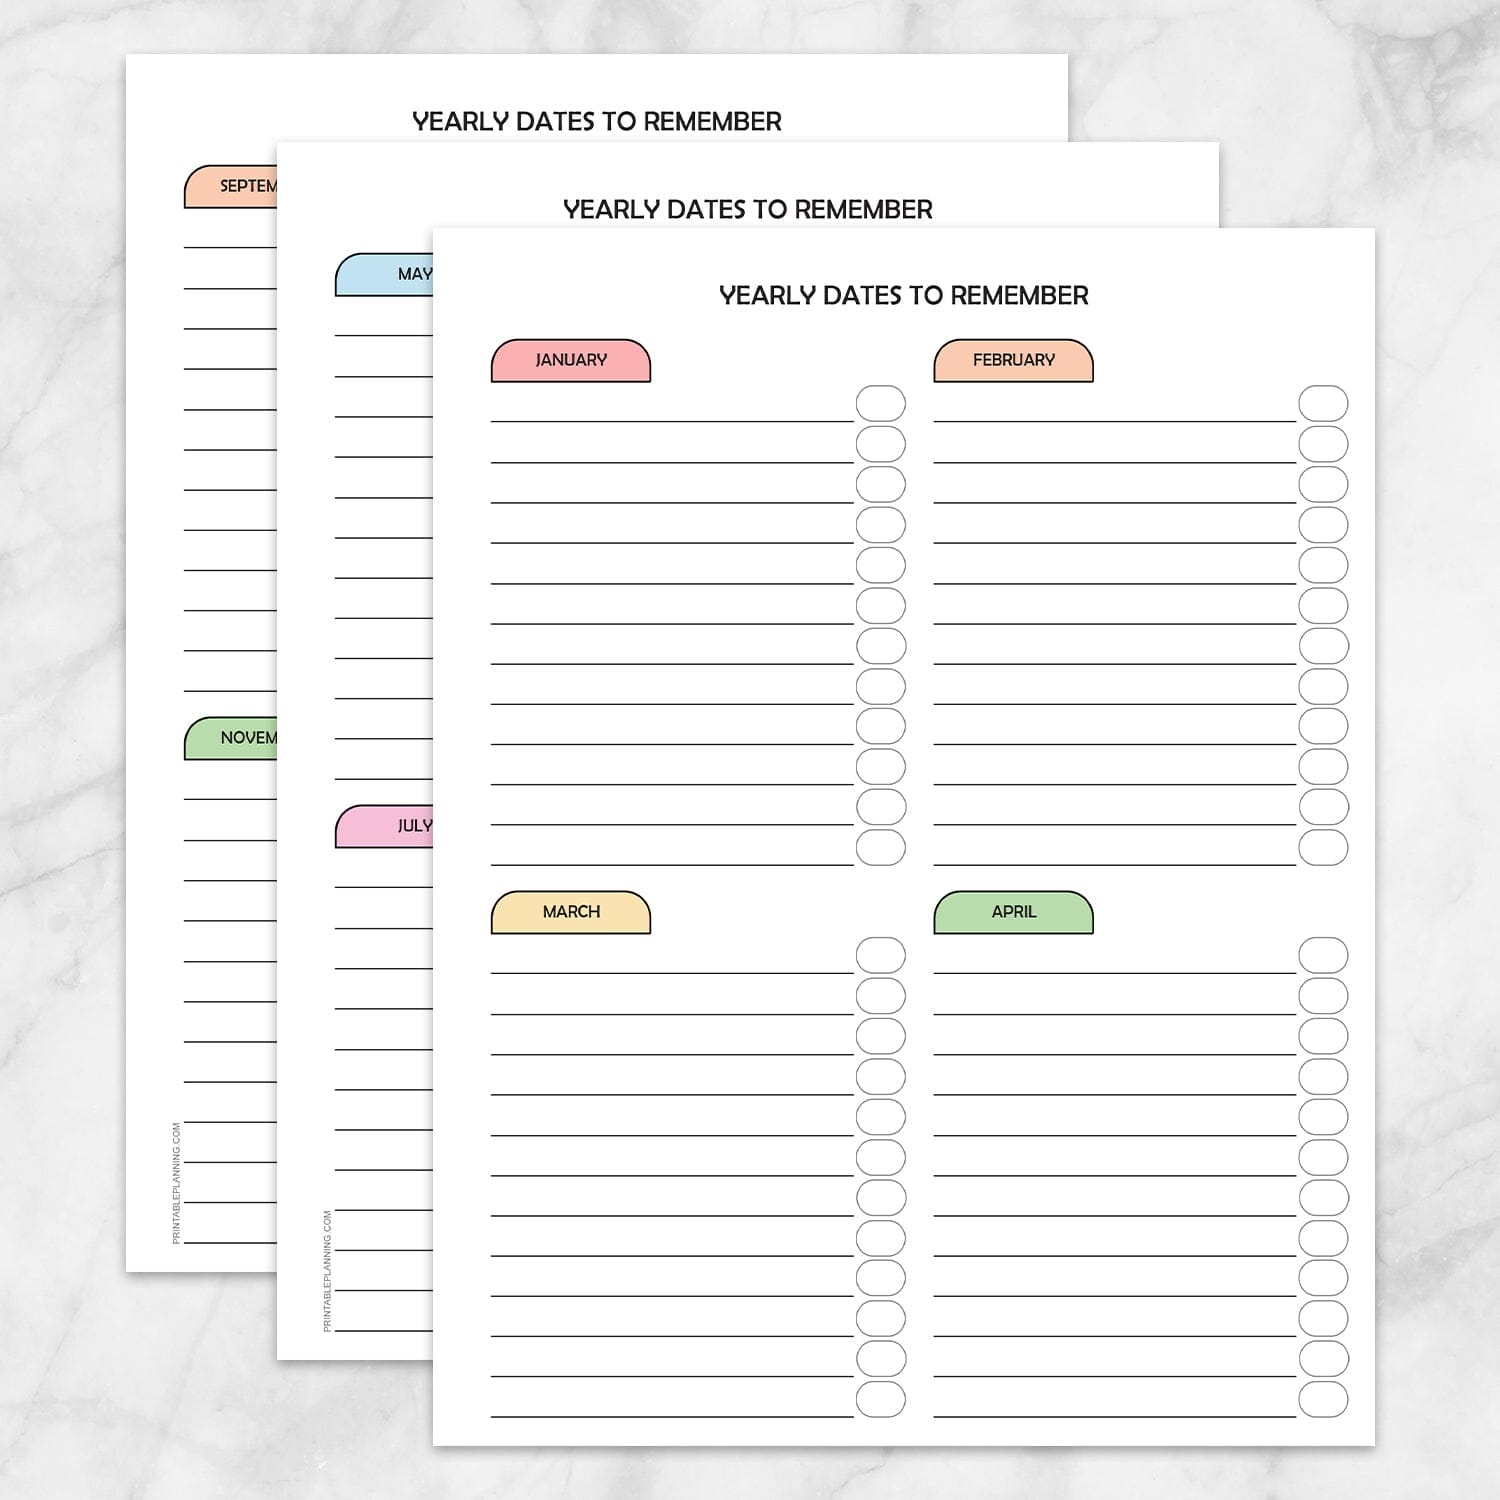 Printable Modern Yearly Dates to Remember Pages (3 pages) at Printable Planning.